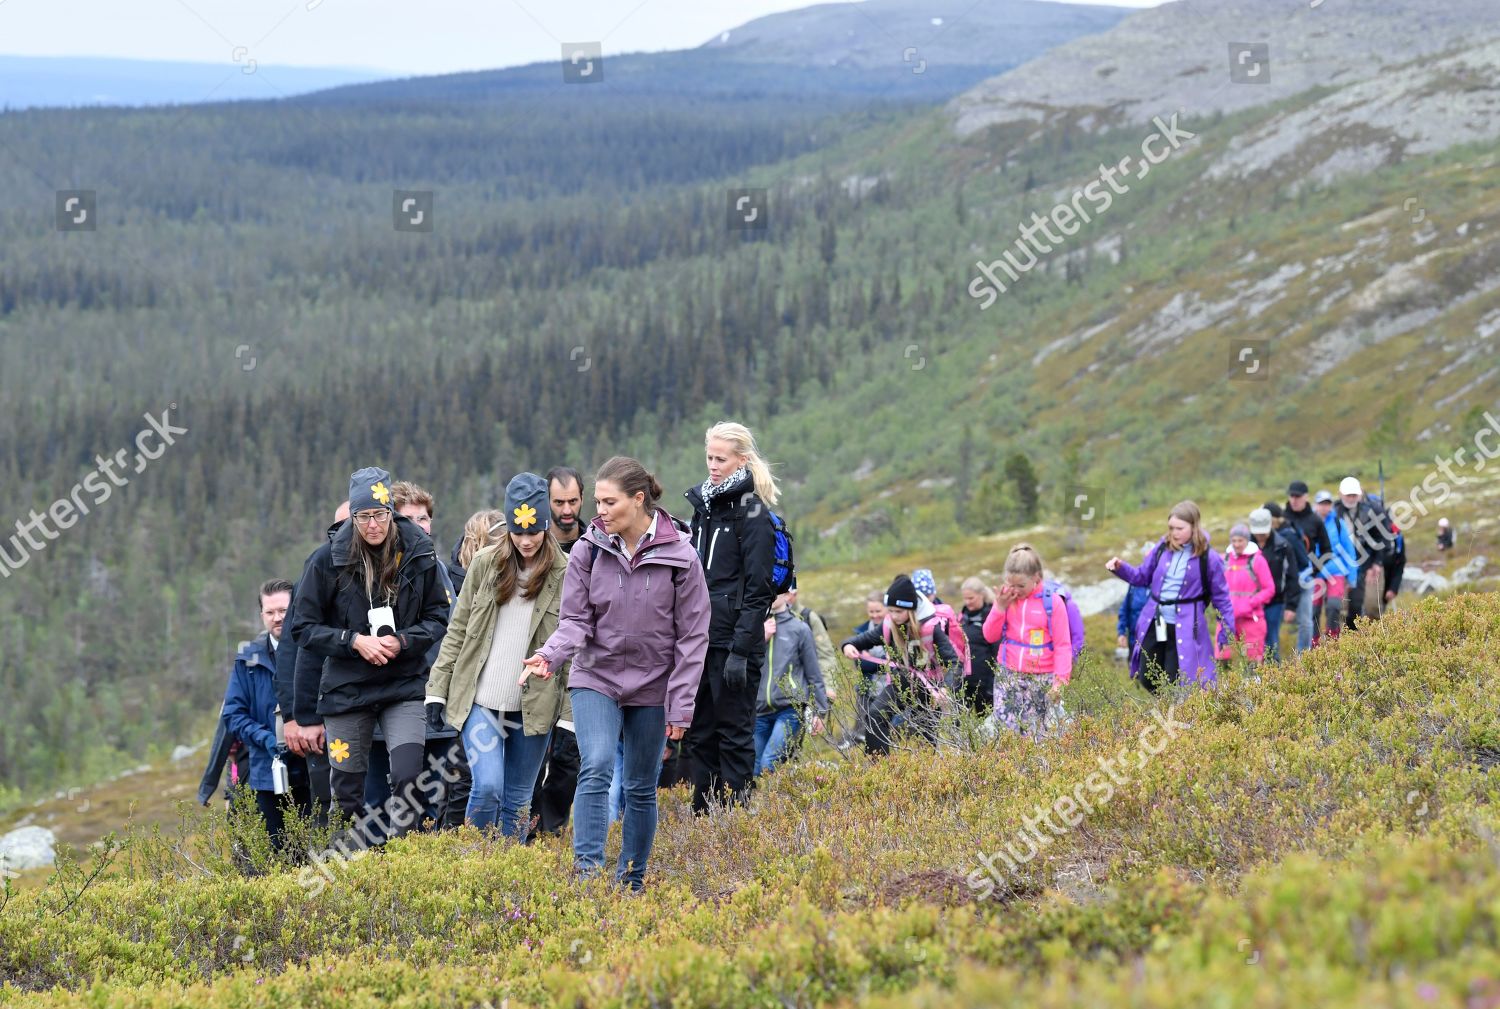 crown-princess-victoria-and-princess-sofia-of-sweden-during-victorias-last-province-walk-dalarna-county-sweden-shutterstock-editorial-10303164q.jpg